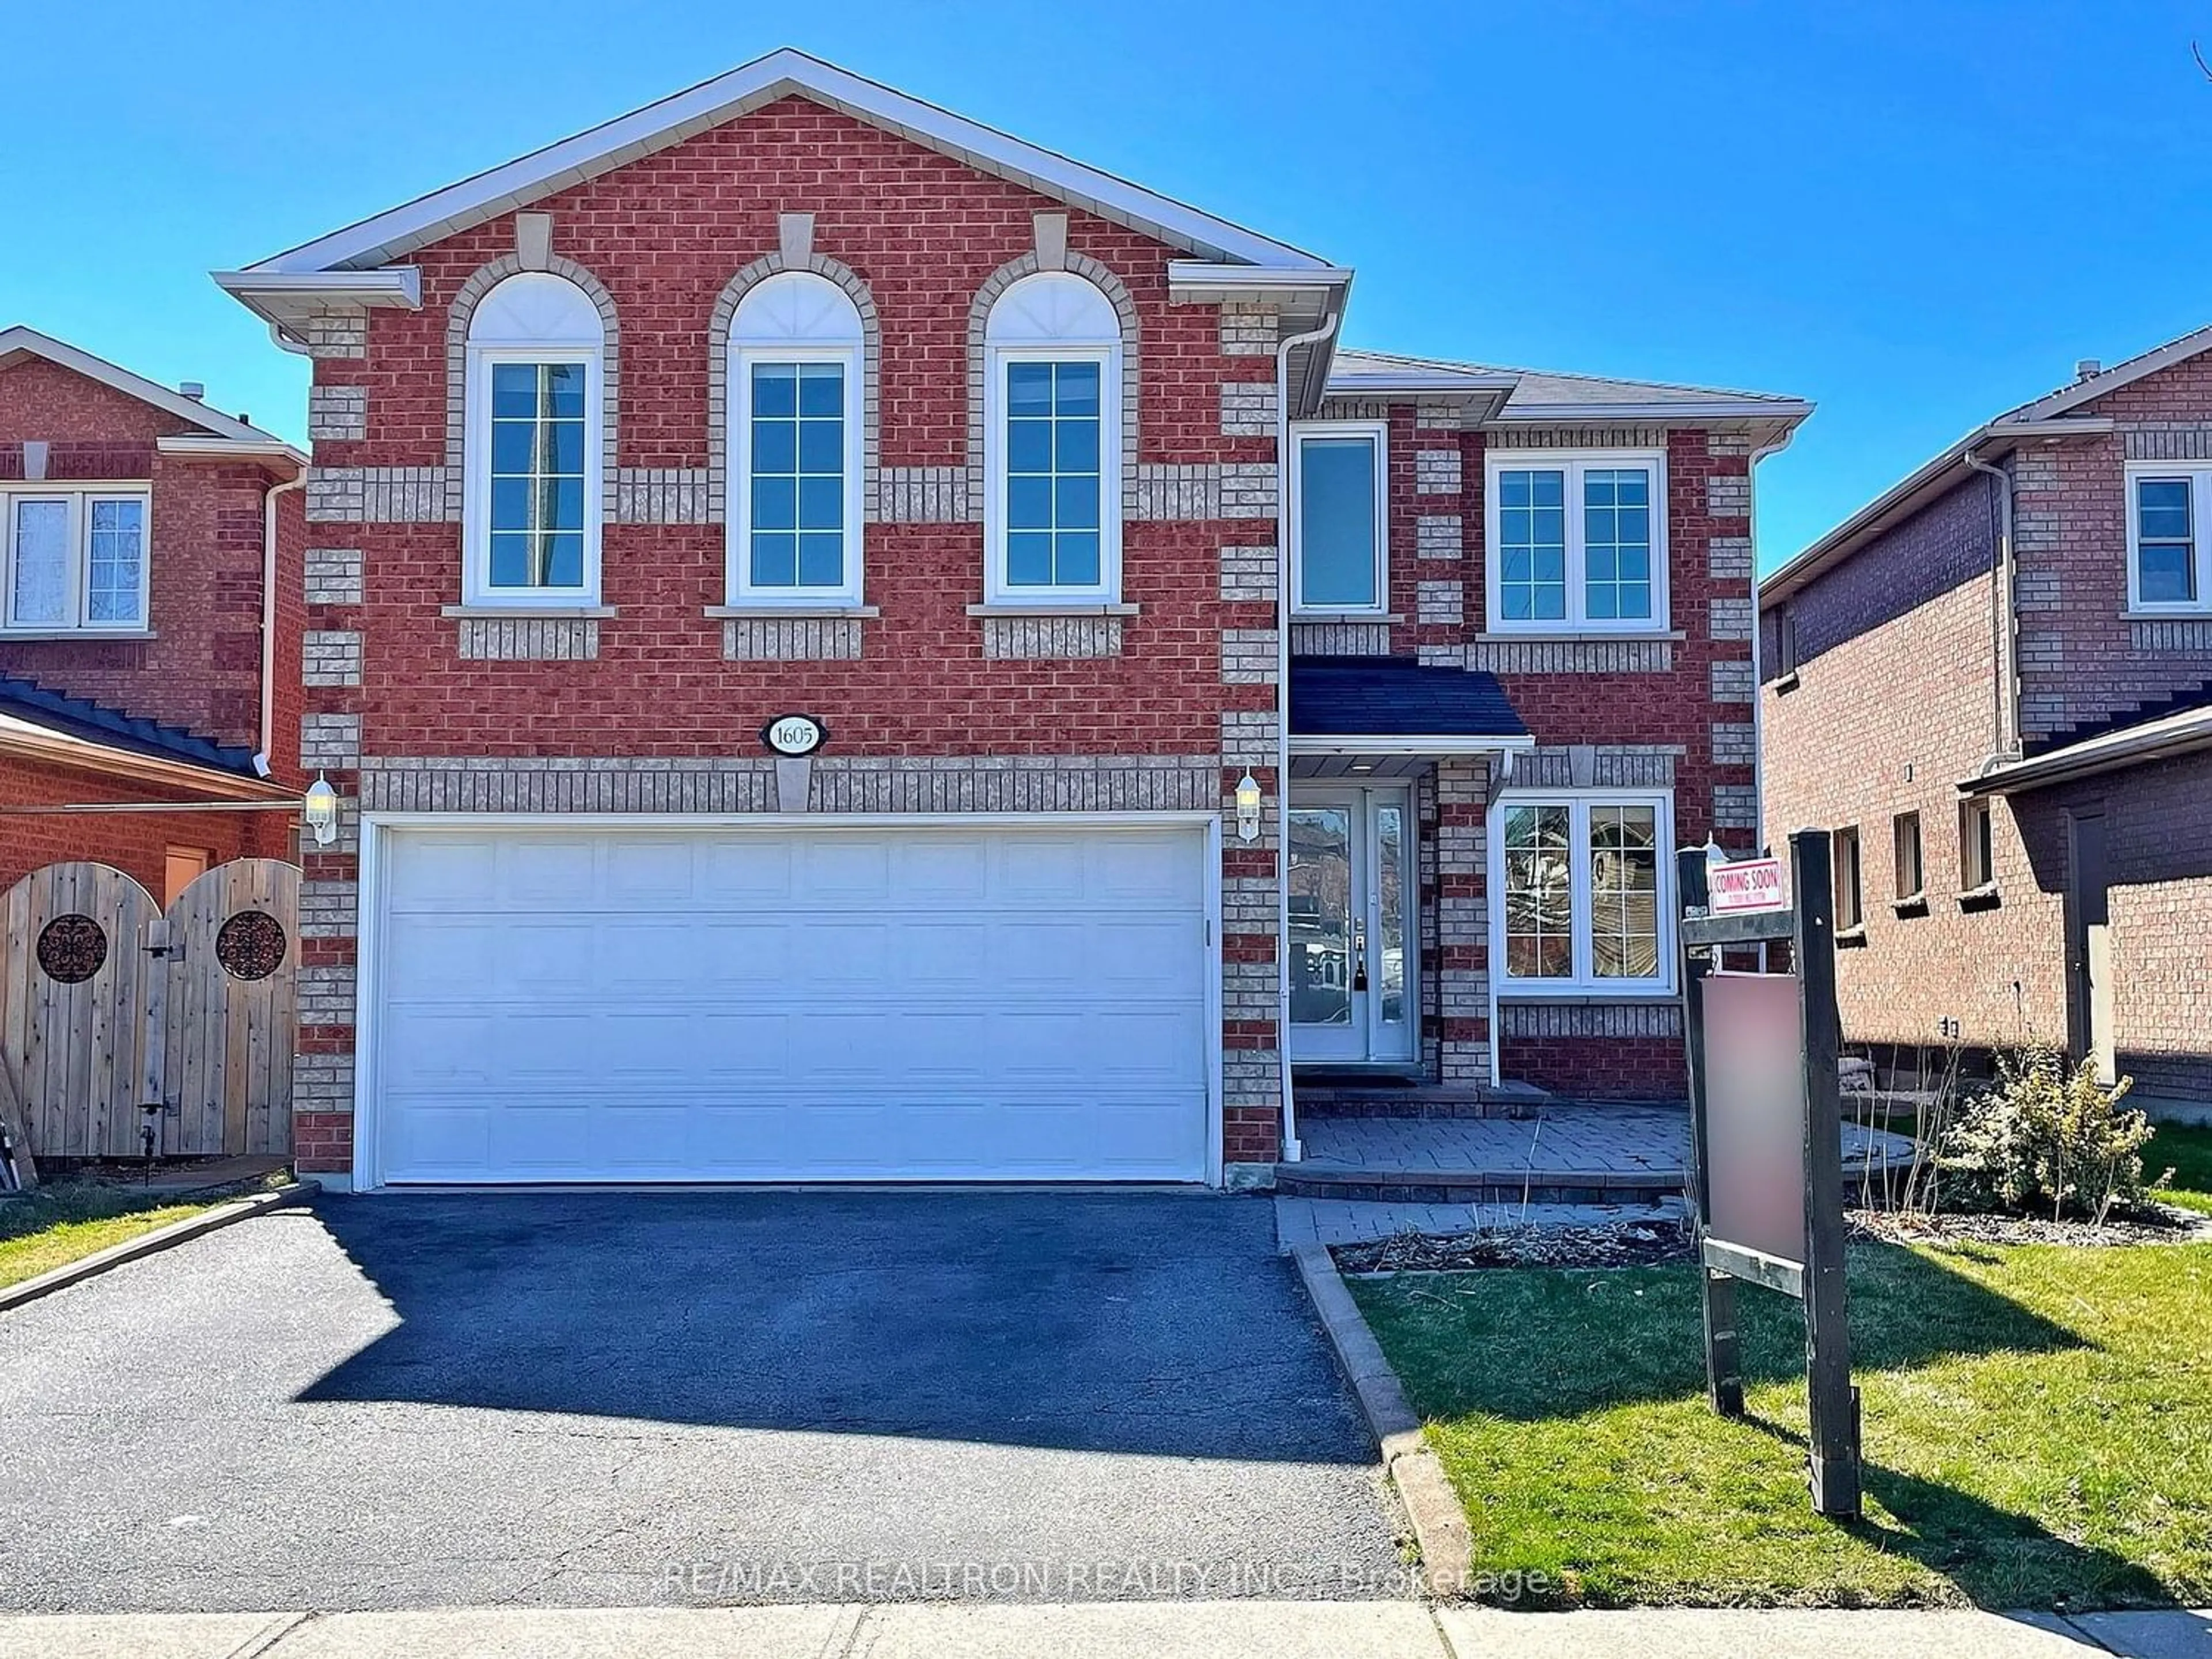 Home with brick exterior material for 1605 Seguin Sq, Pickering Ontario L1V 6T4